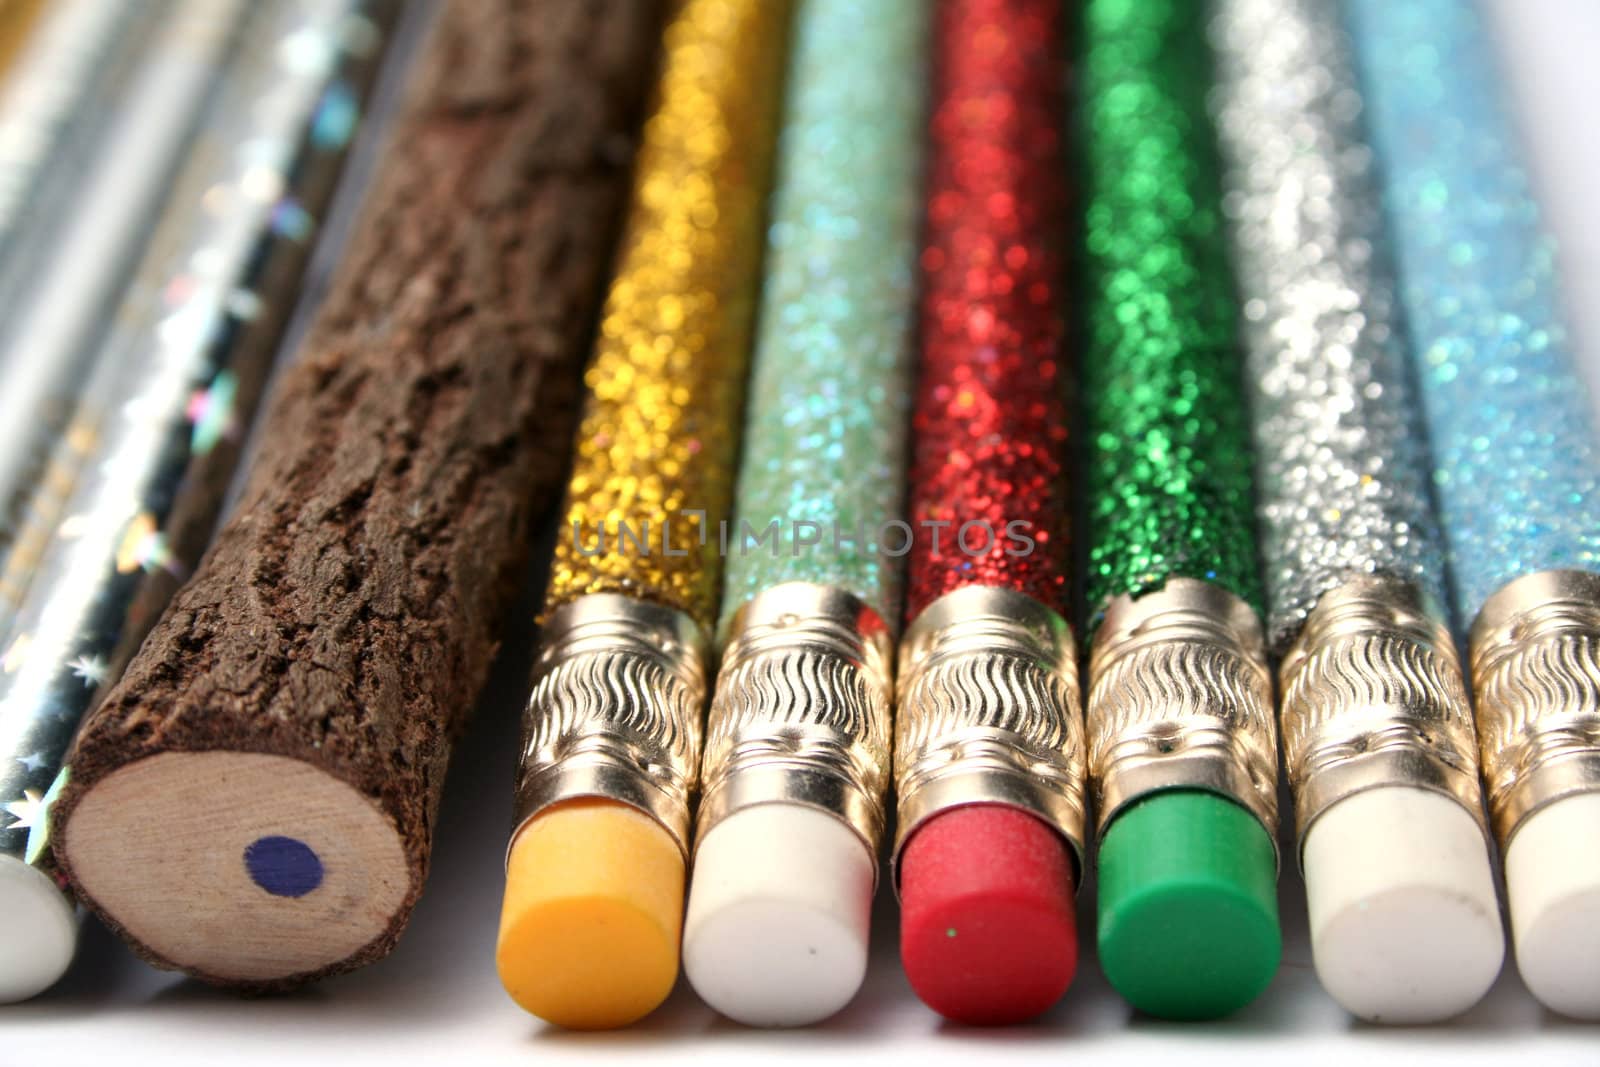 Unusual pencil made of wood among multi-coloured pencils 3 by parrus